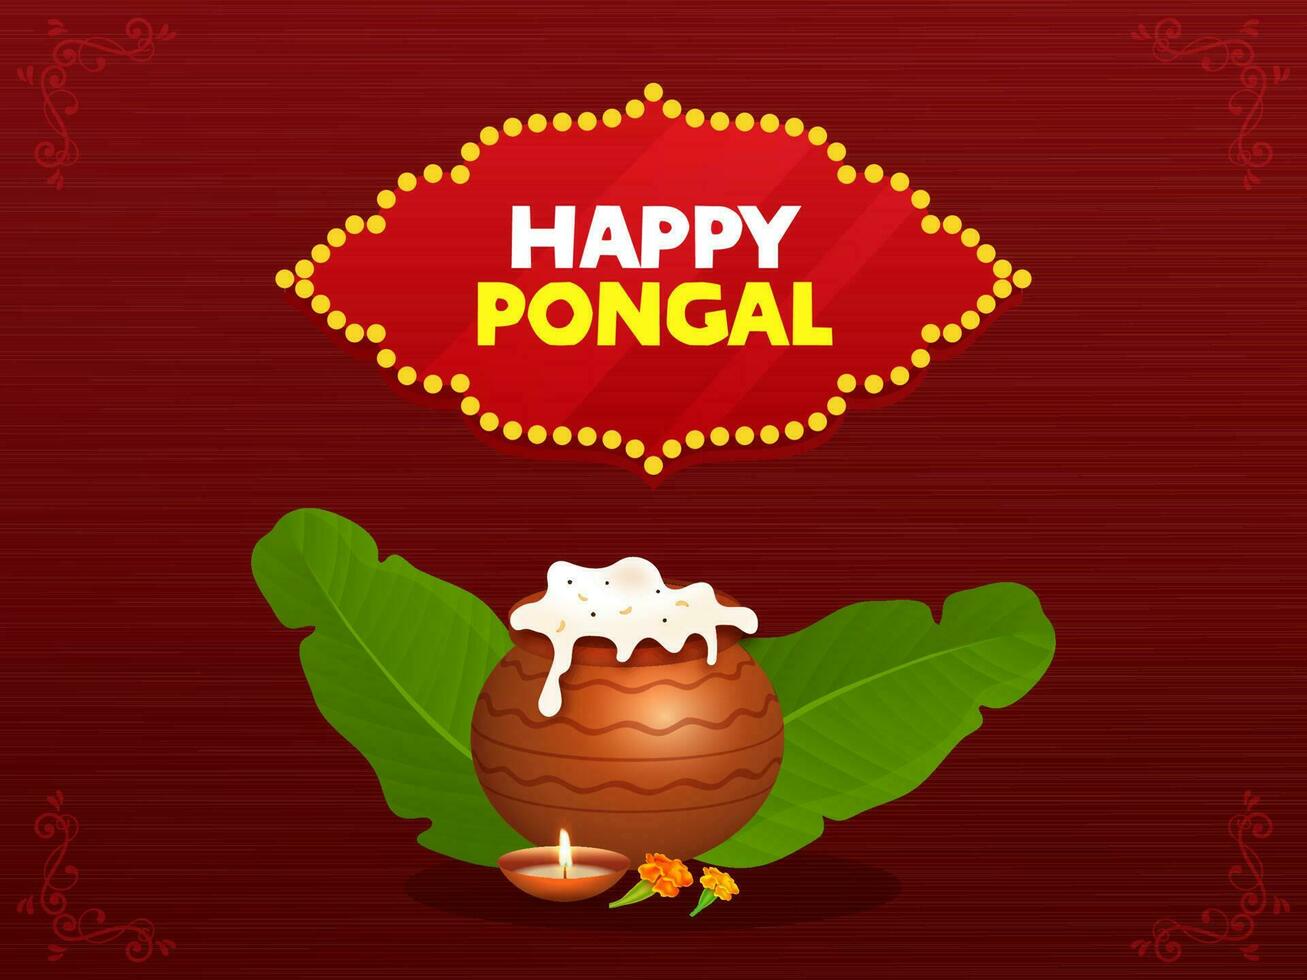 Happy Pongal Text Over Vintage Frame With Pongali Rice In Clay Pot, Banana Leaves, Lit Oil Lamp And Marigold Flowers On Red Background. vector